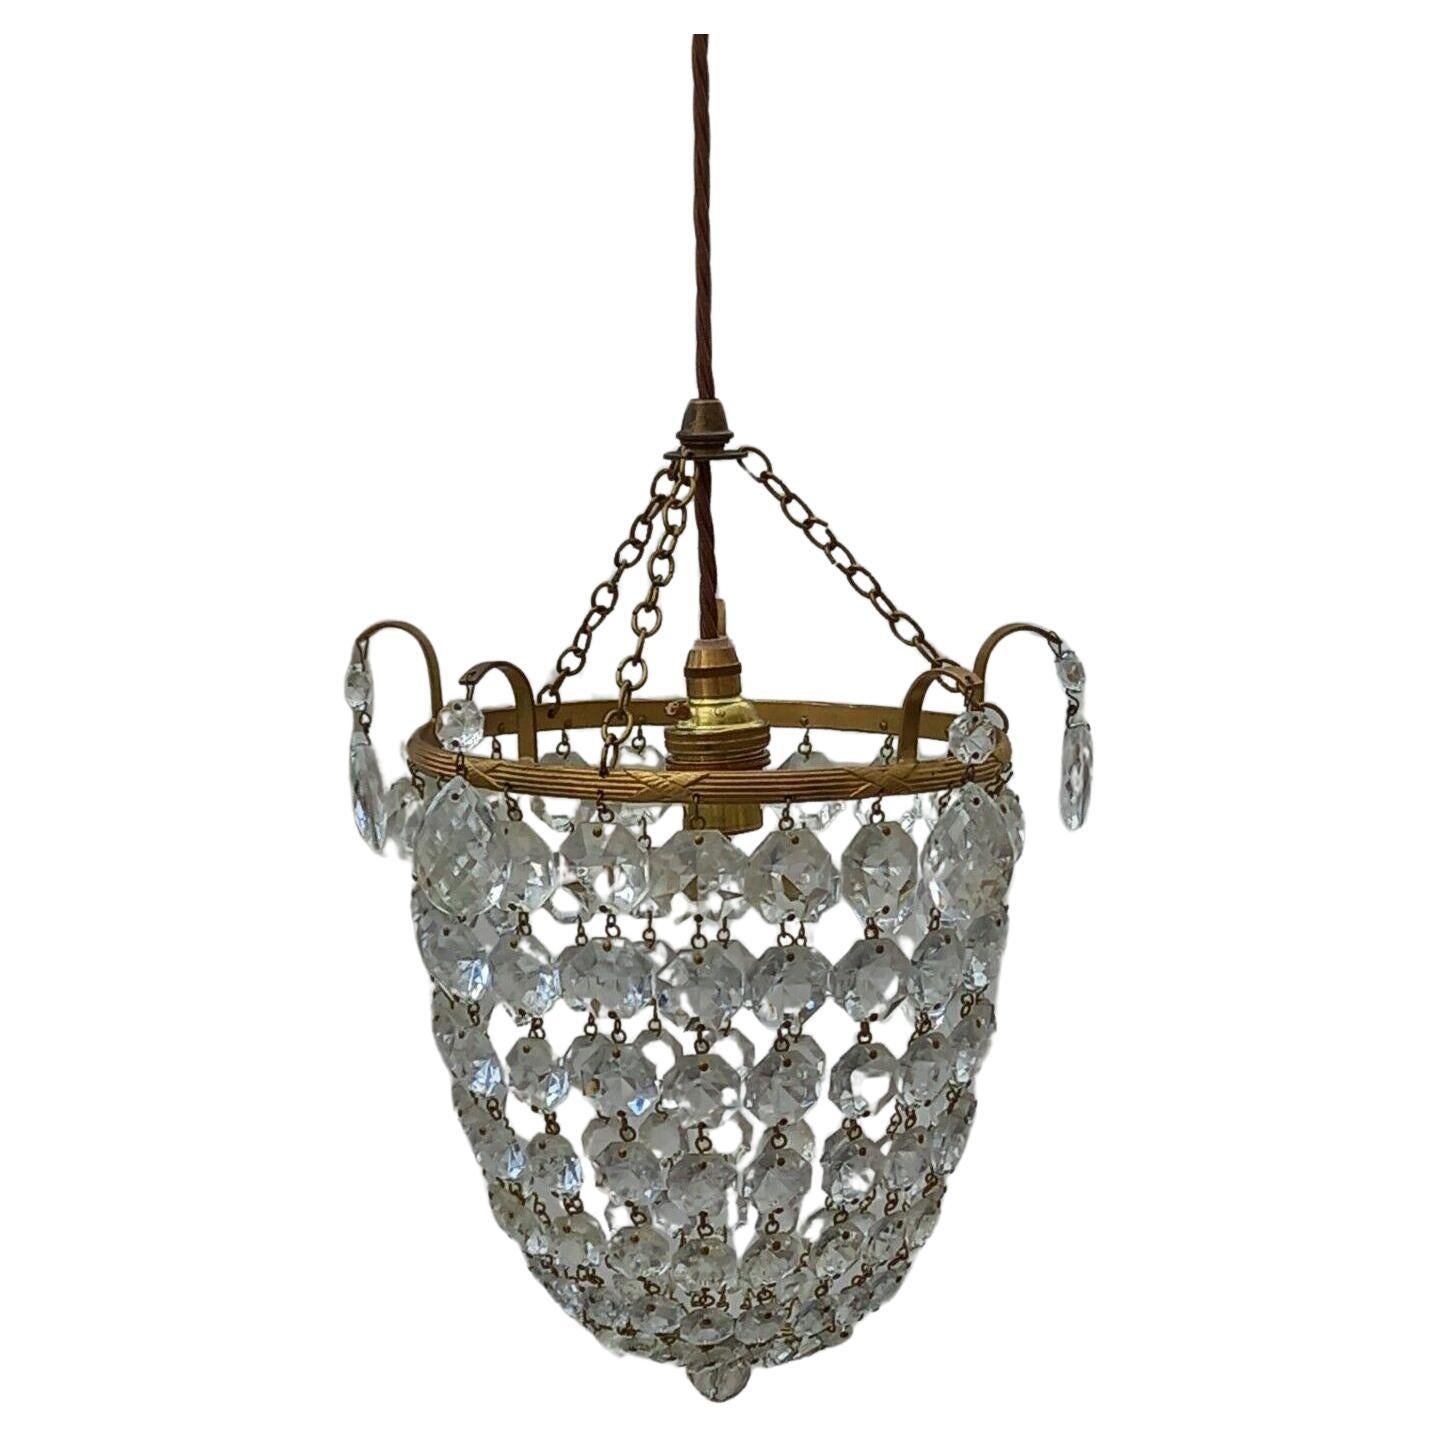 c1890 British Empire Bronze with Cut Crystal Bag and Tent style Chandelier/ Pendant Ceiling Fixture. I purchased this fixture along with some other beautiful British fixtures from a lighting dealer.